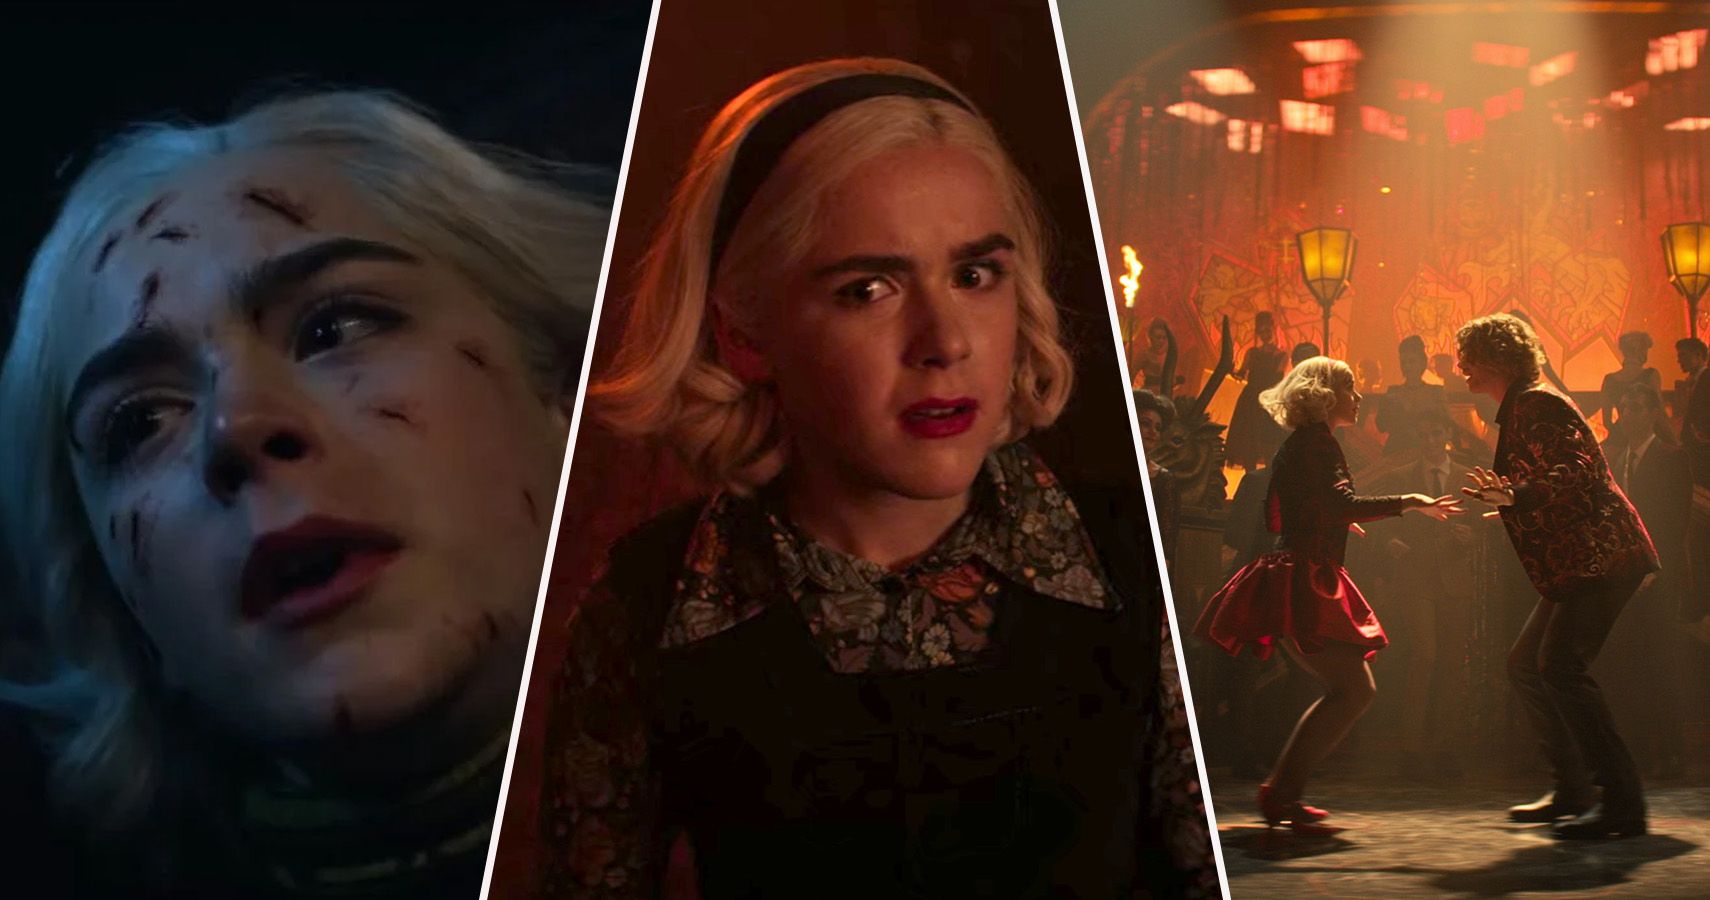 The Chilling Adventures of Sabrina collage